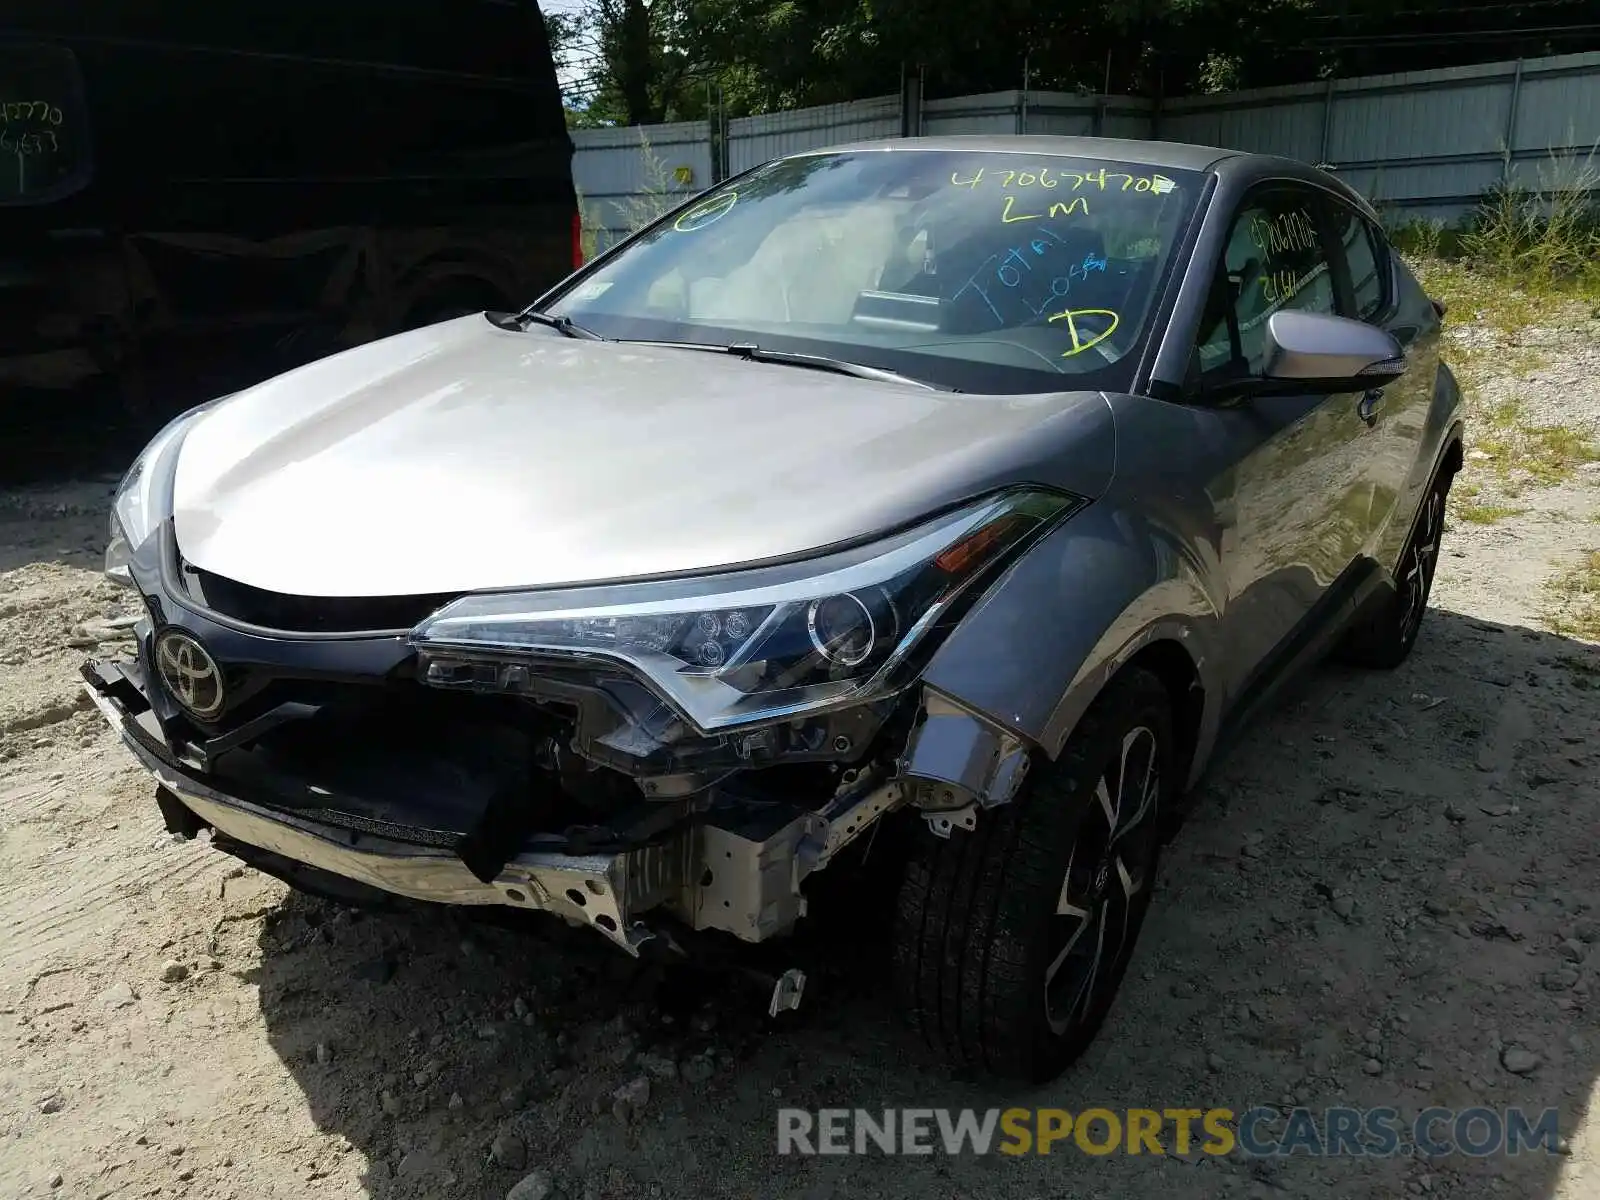 2 Photograph of a damaged car NMTKHMBXXKR069781 TOYOTA C-HR 2019